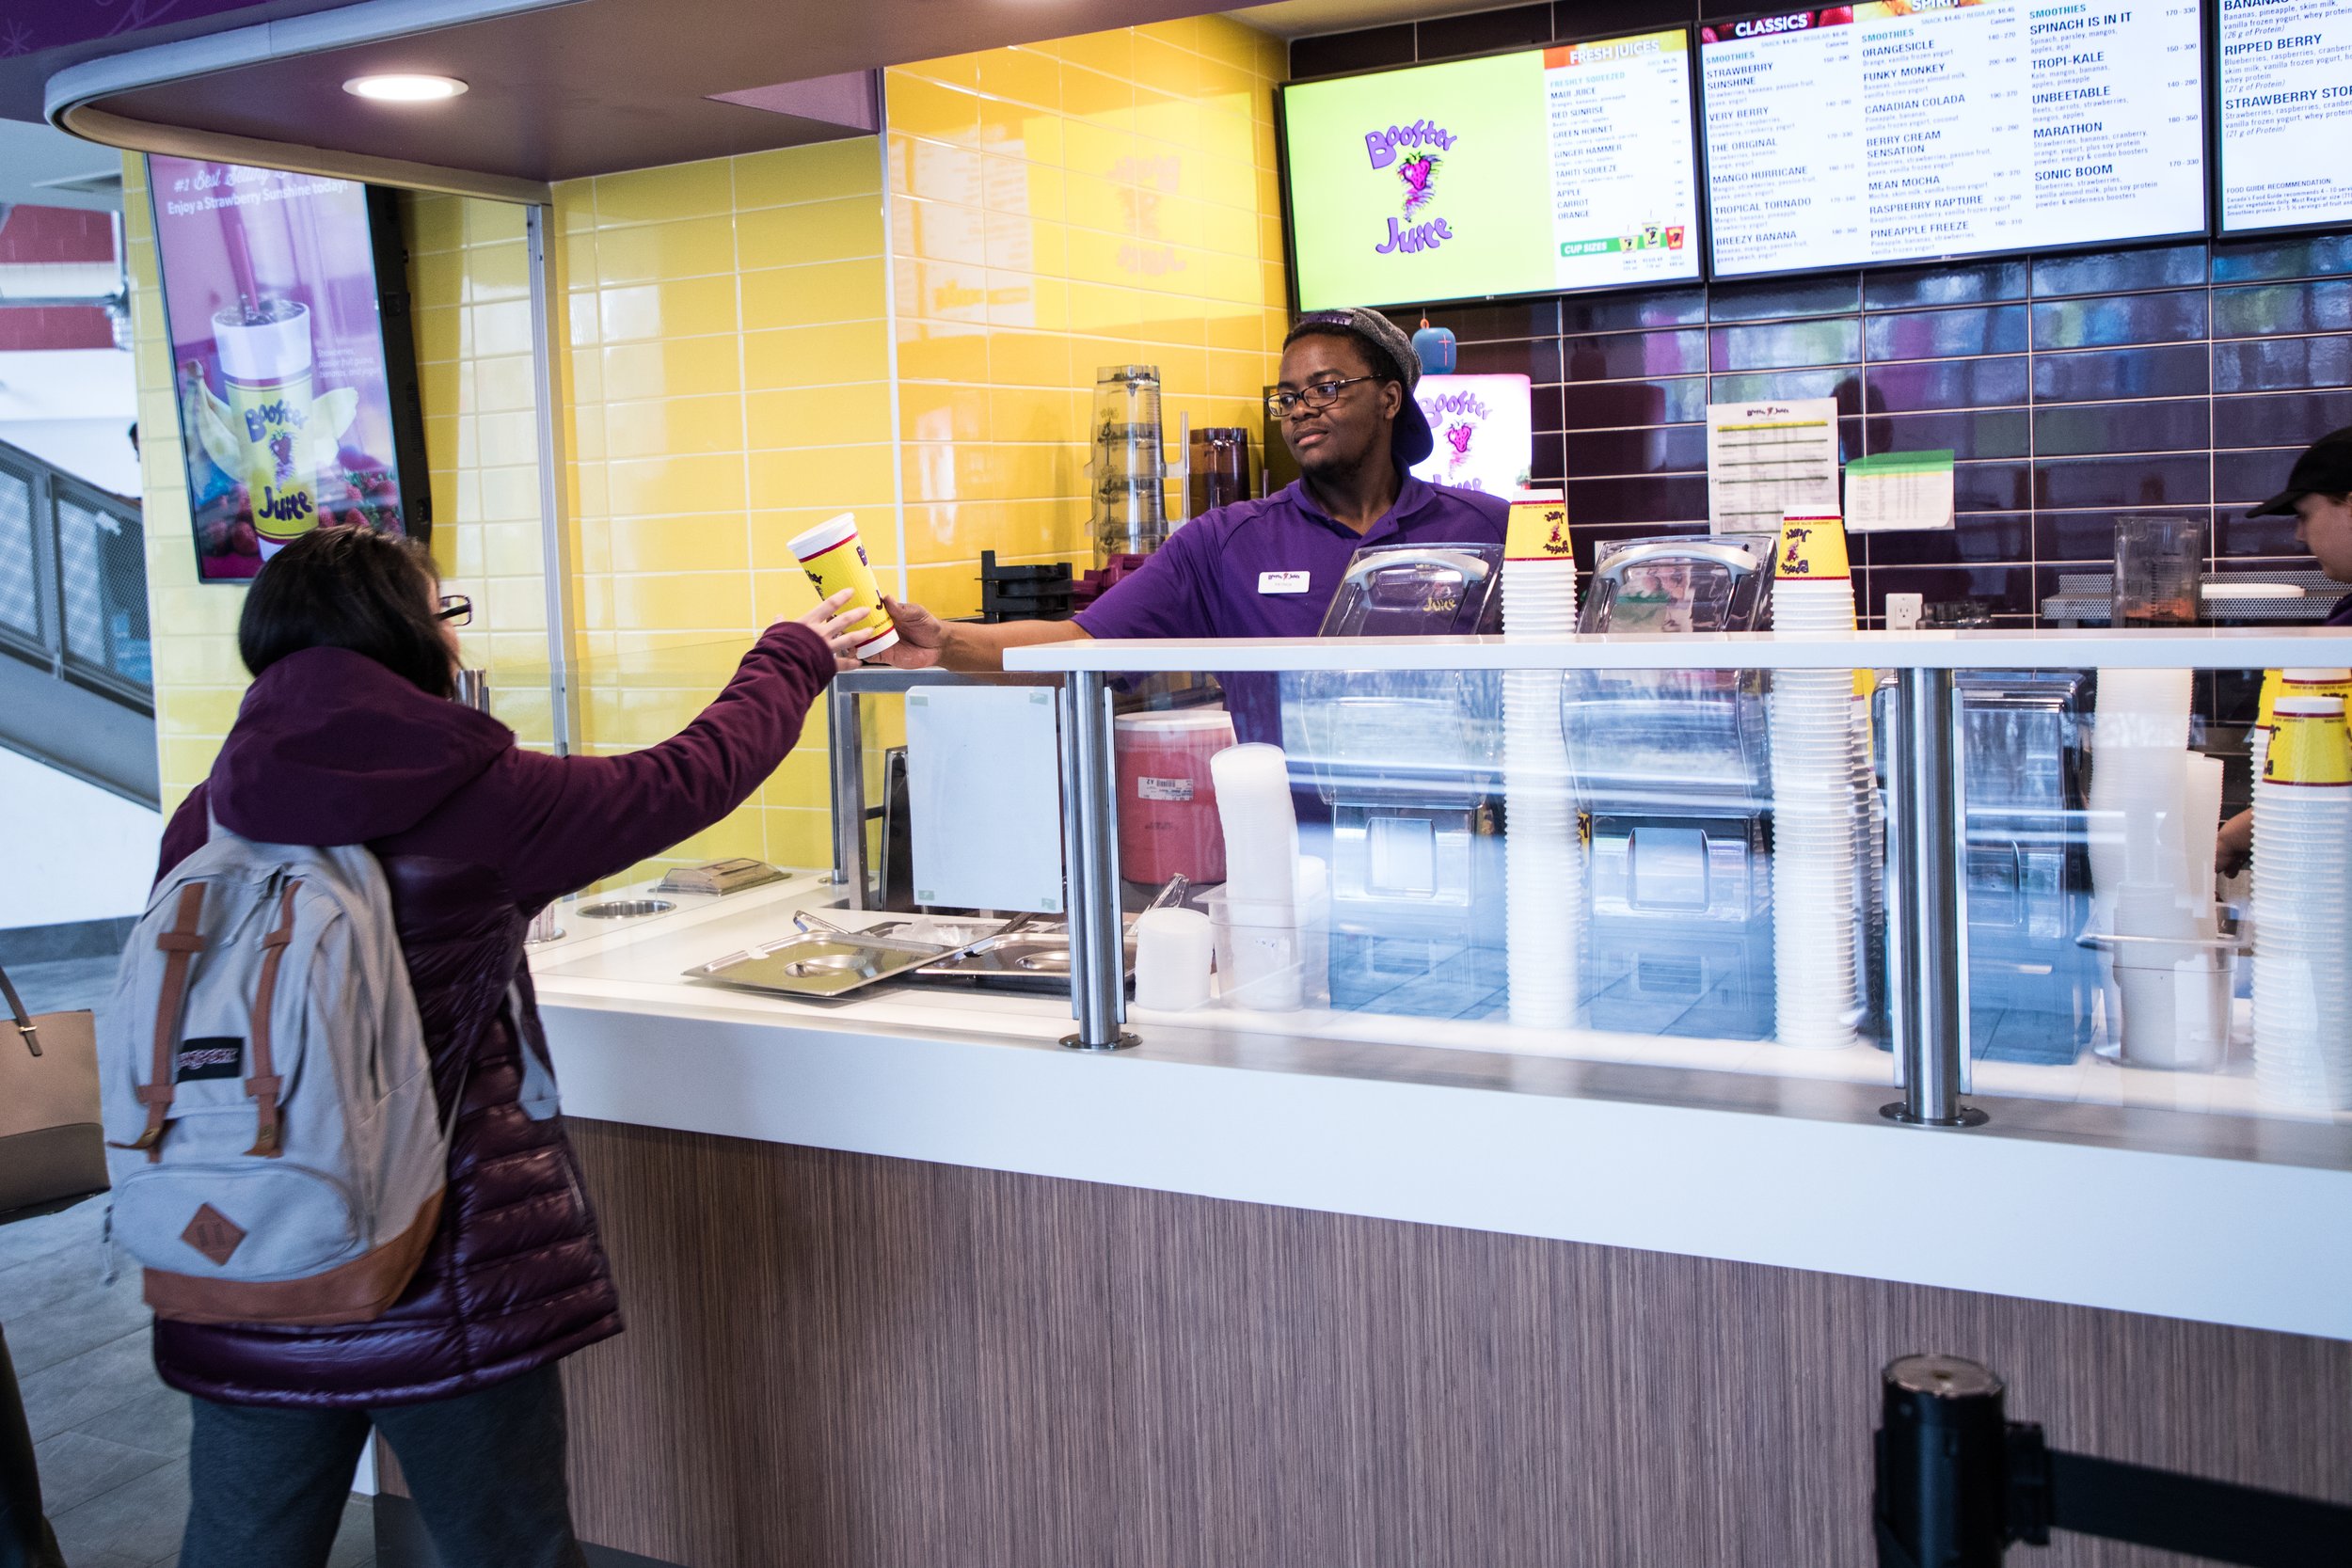  Booster Juice employee in a purple Booster Juice outfit, standing behind the desk, hands a student a Booster Juice drink.  